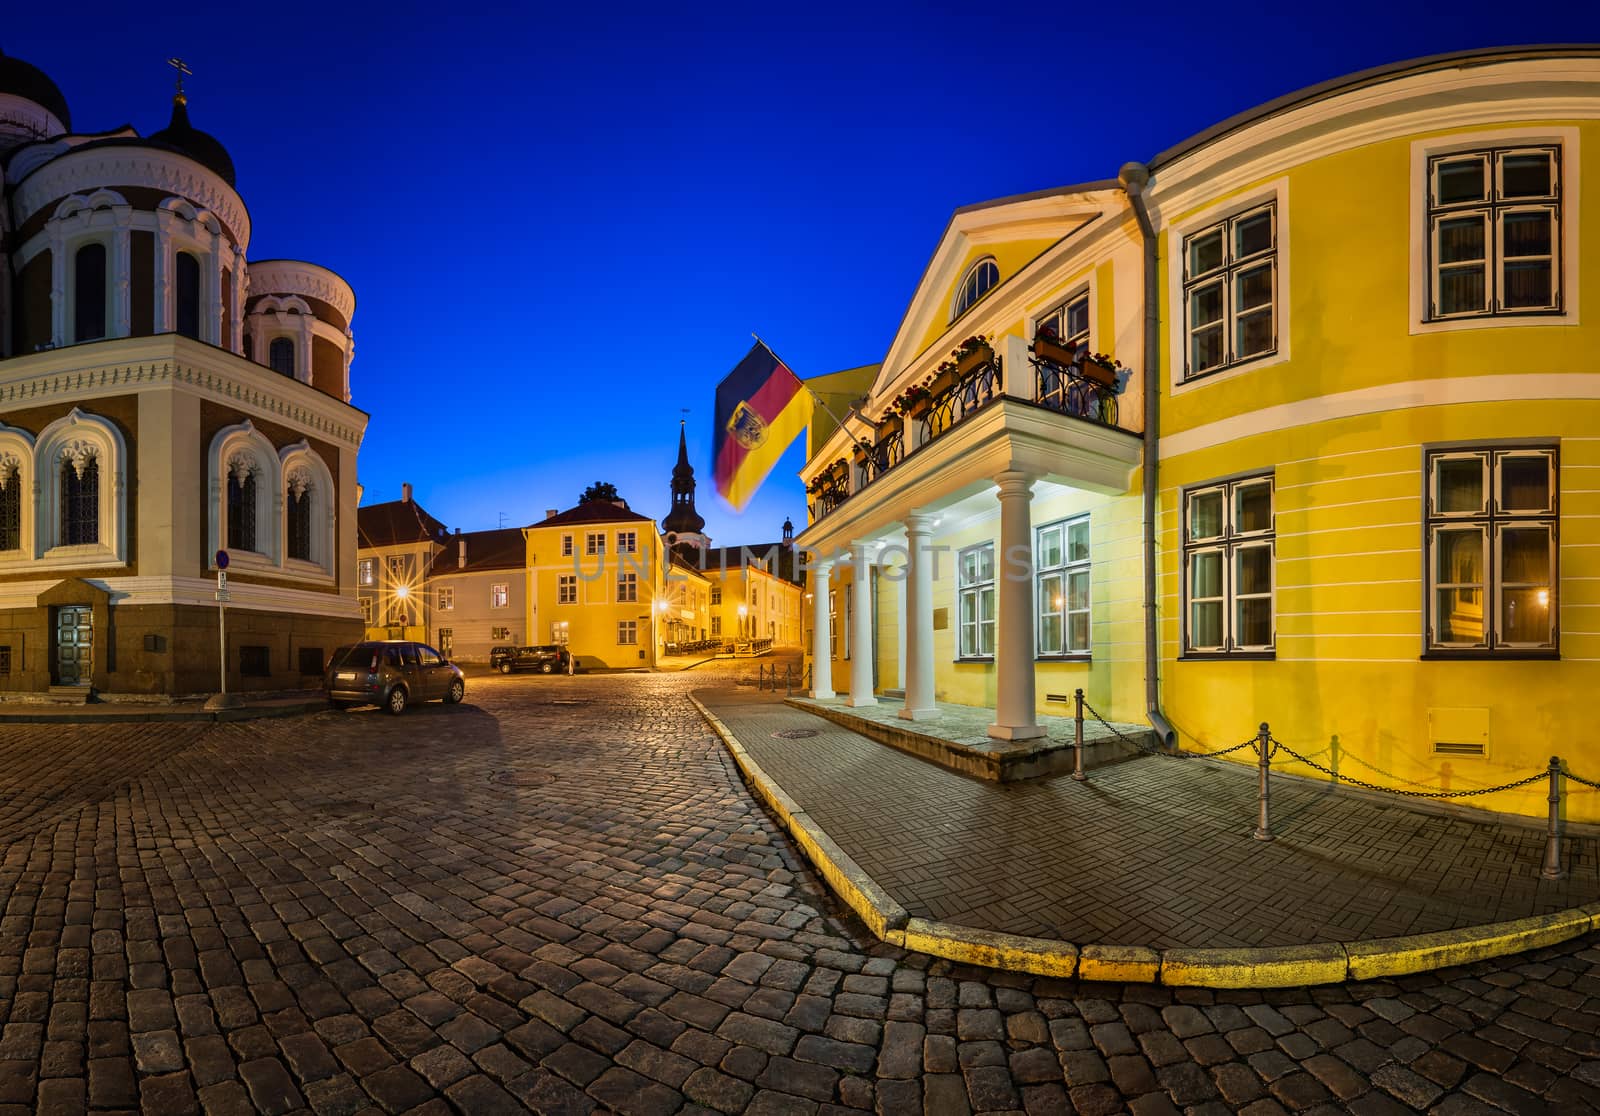 Lossi Plats Square and Alexander Nevski Cathedral in the Evening by anshar